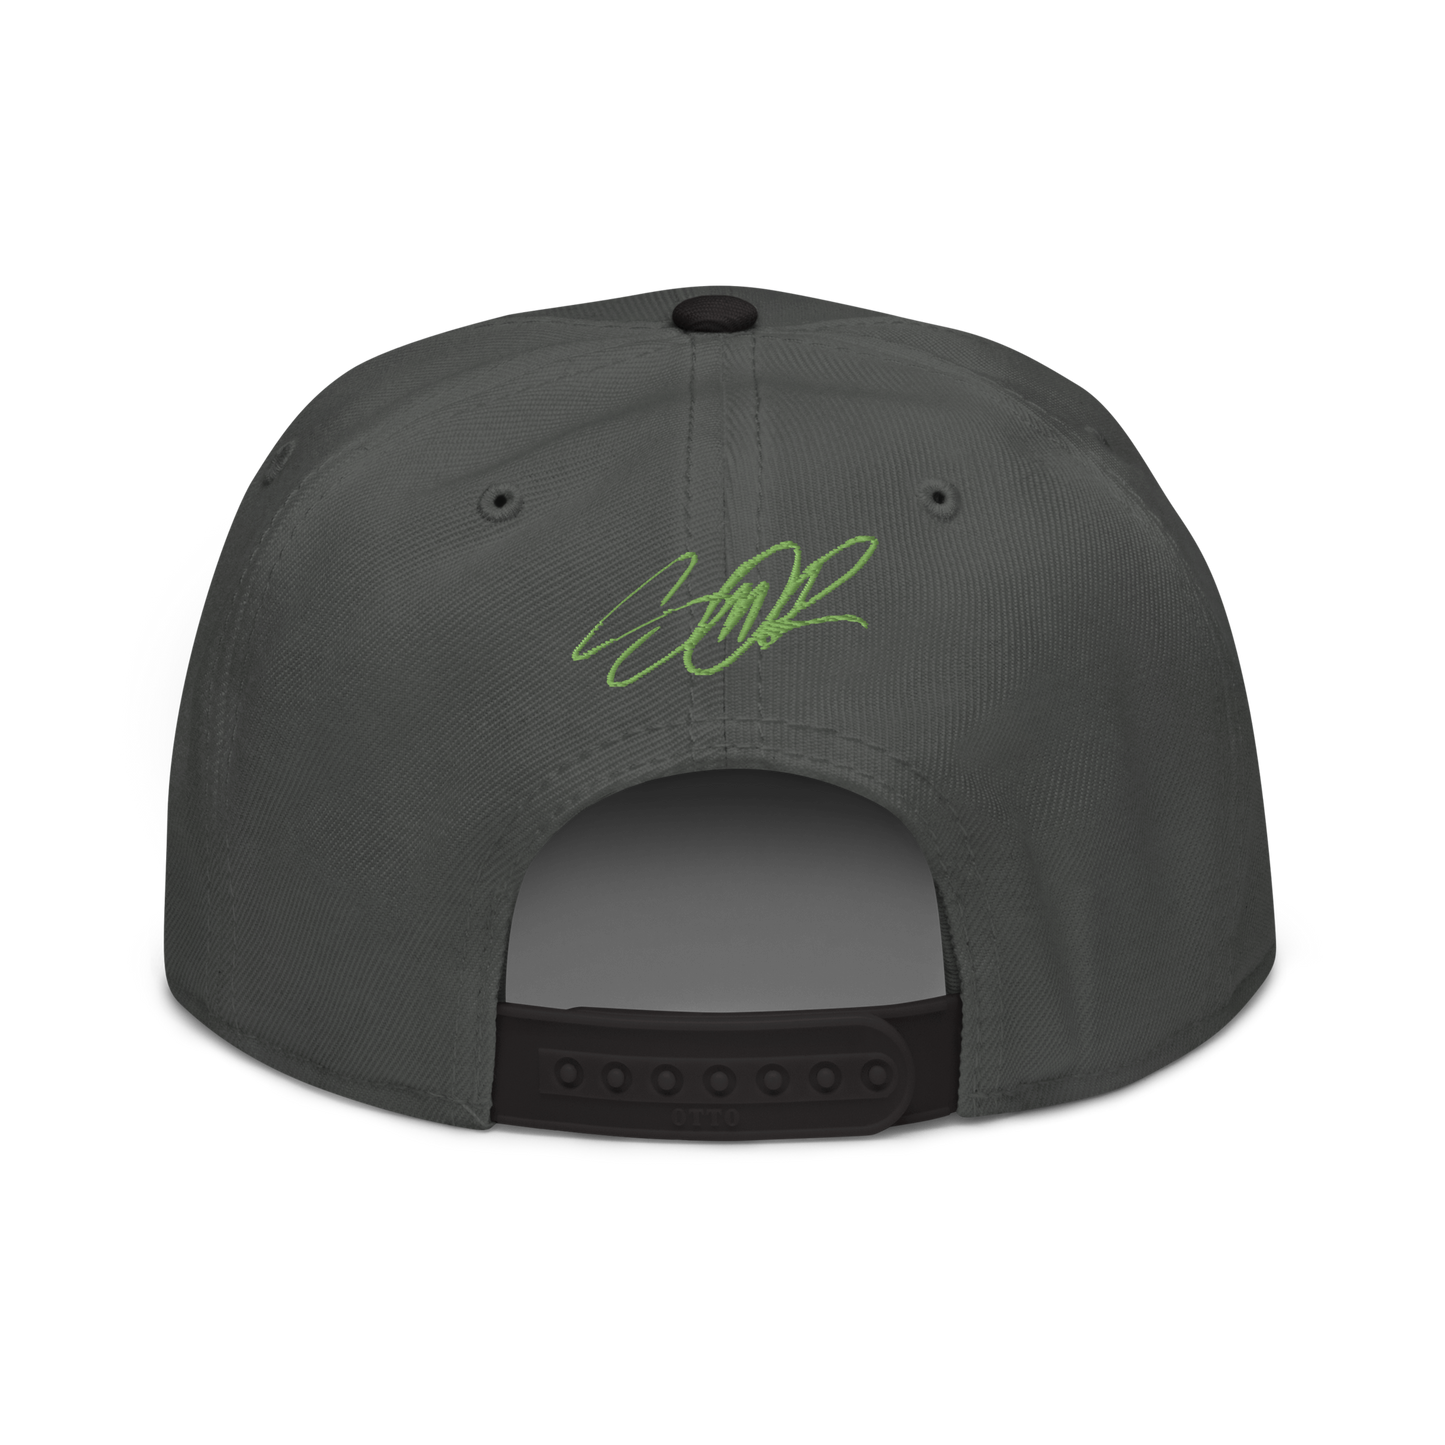 Back of Graffiti DZA Snapback by Sanitor in Charcoal Gray with Black Brim